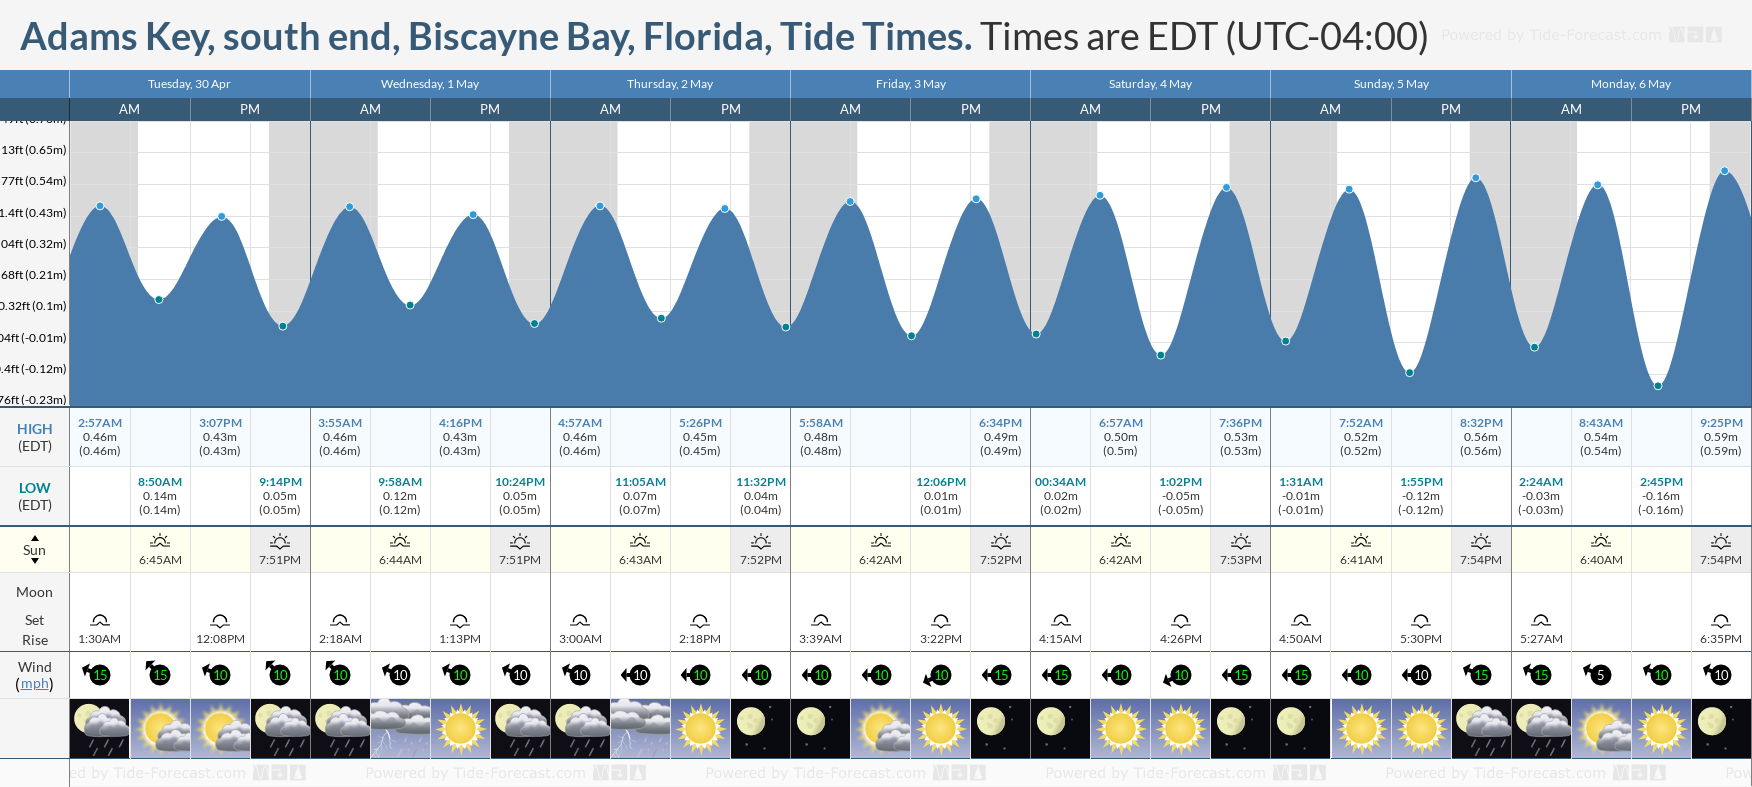 Adams Key, south end, Biscayne Bay, Florida Tide Chart including high and low tide times for the next 7 days